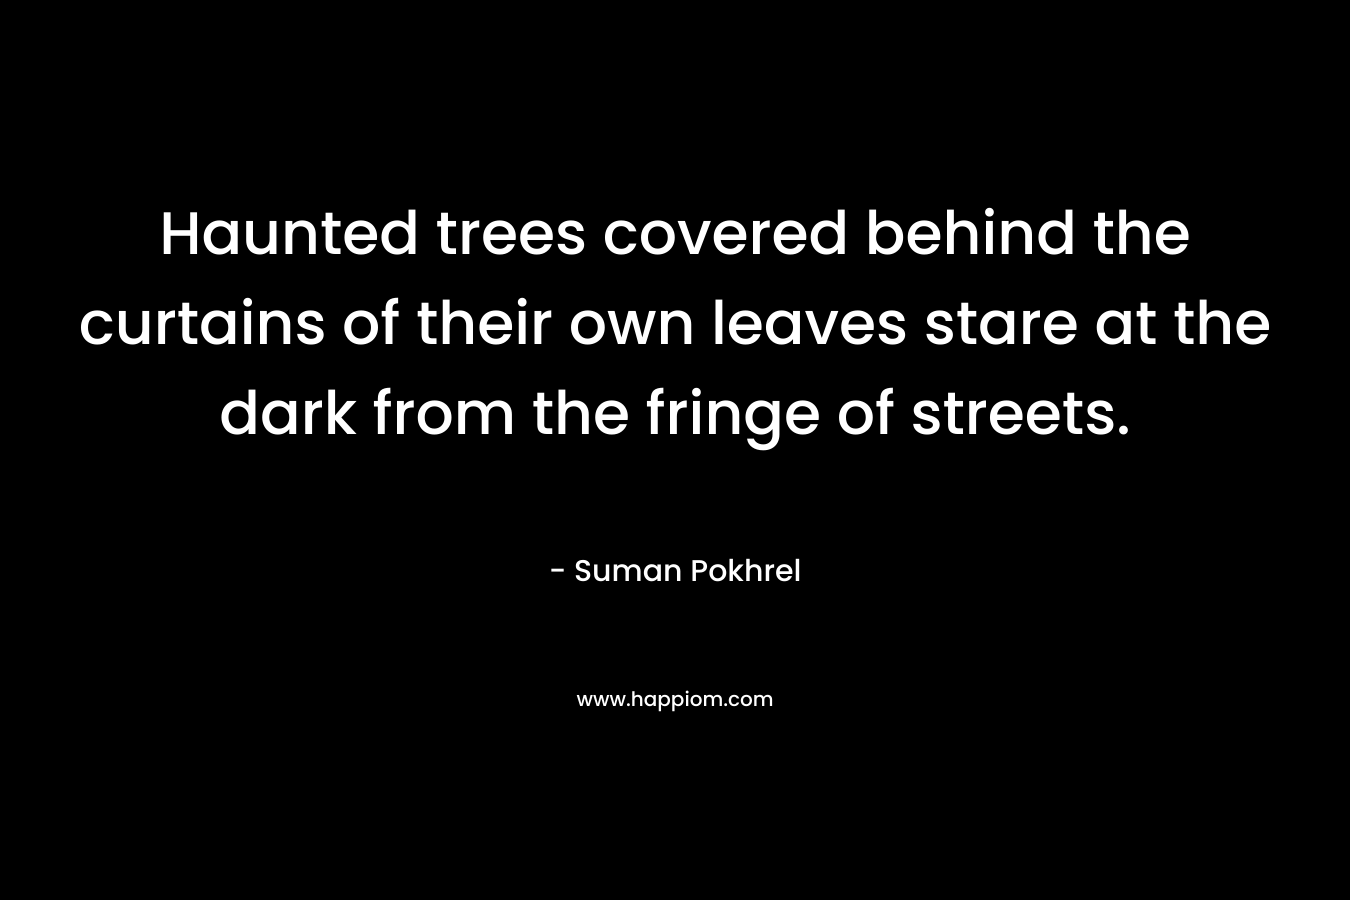 Haunted trees covered behind the curtains of their own leaves stare at the dark from the fringe of streets. – Suman Pokhrel